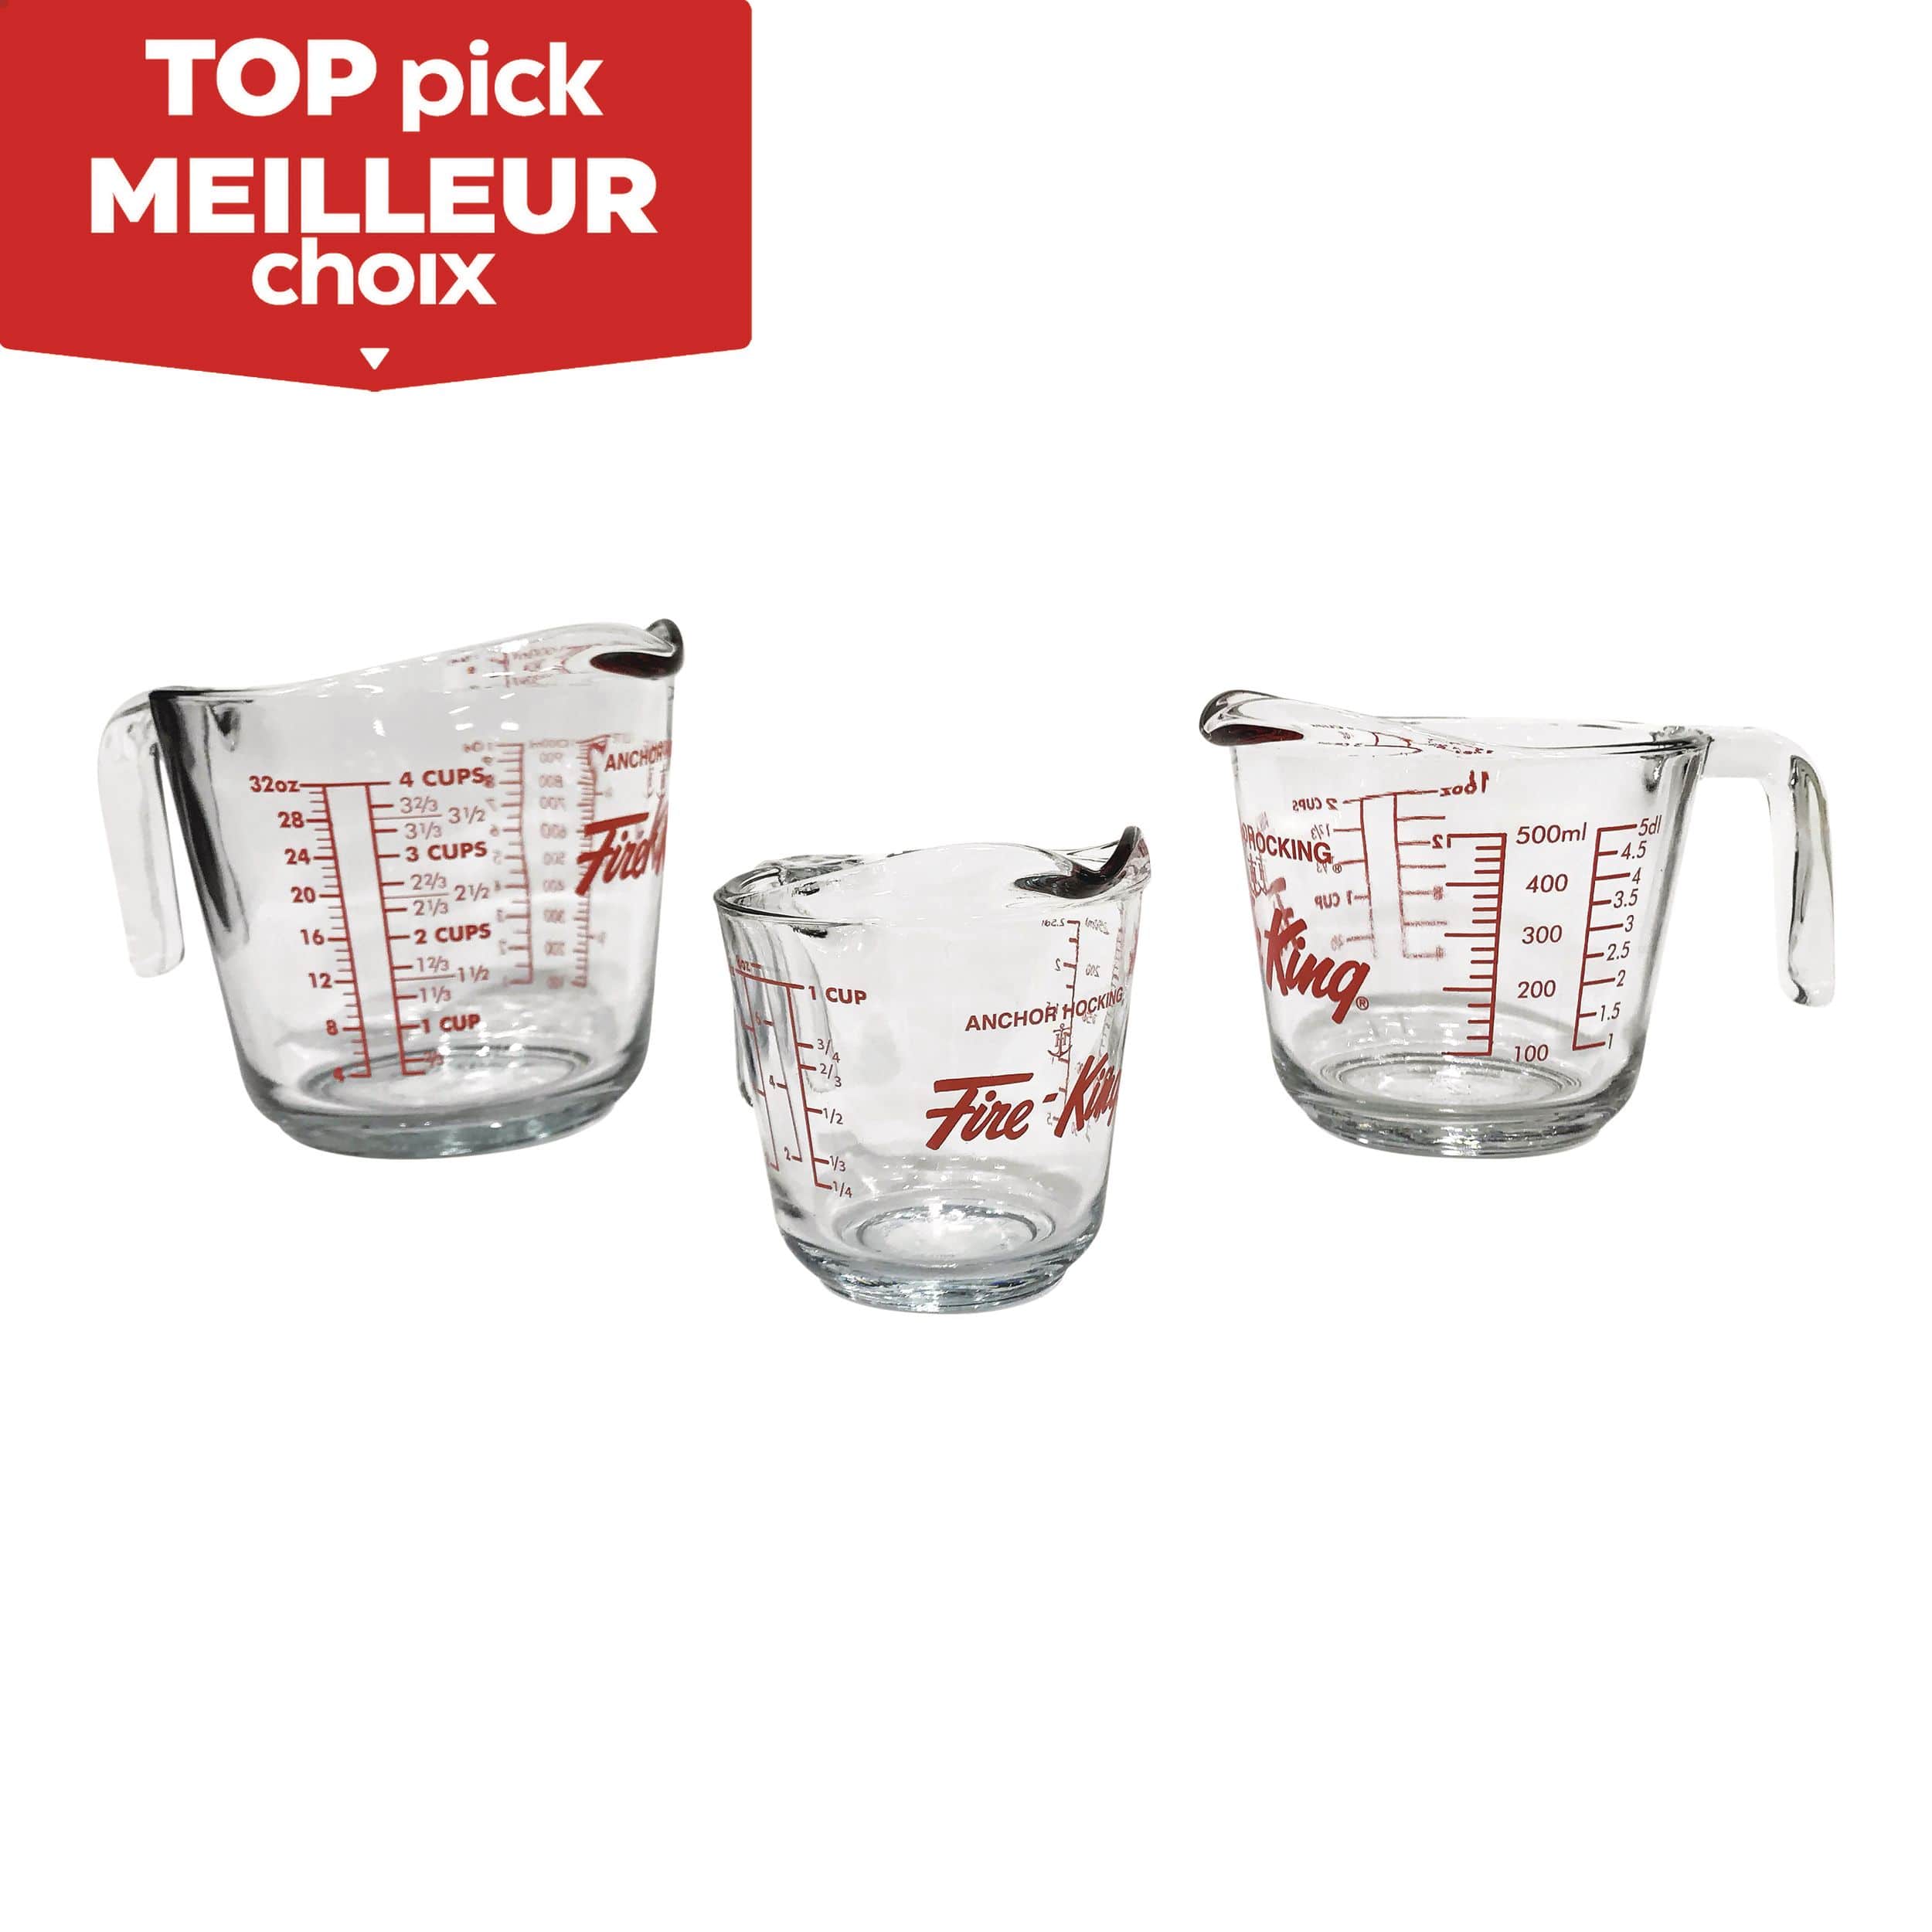 https://media-www.canadiantire.ca/product/living/kitchen/bakeware-baking-prep/0421133/anchor-value-pack-3-piece-measuring-cup-set-96db974a-af03-4681-a0db-404bf7969abc-jpgrendition.jpg